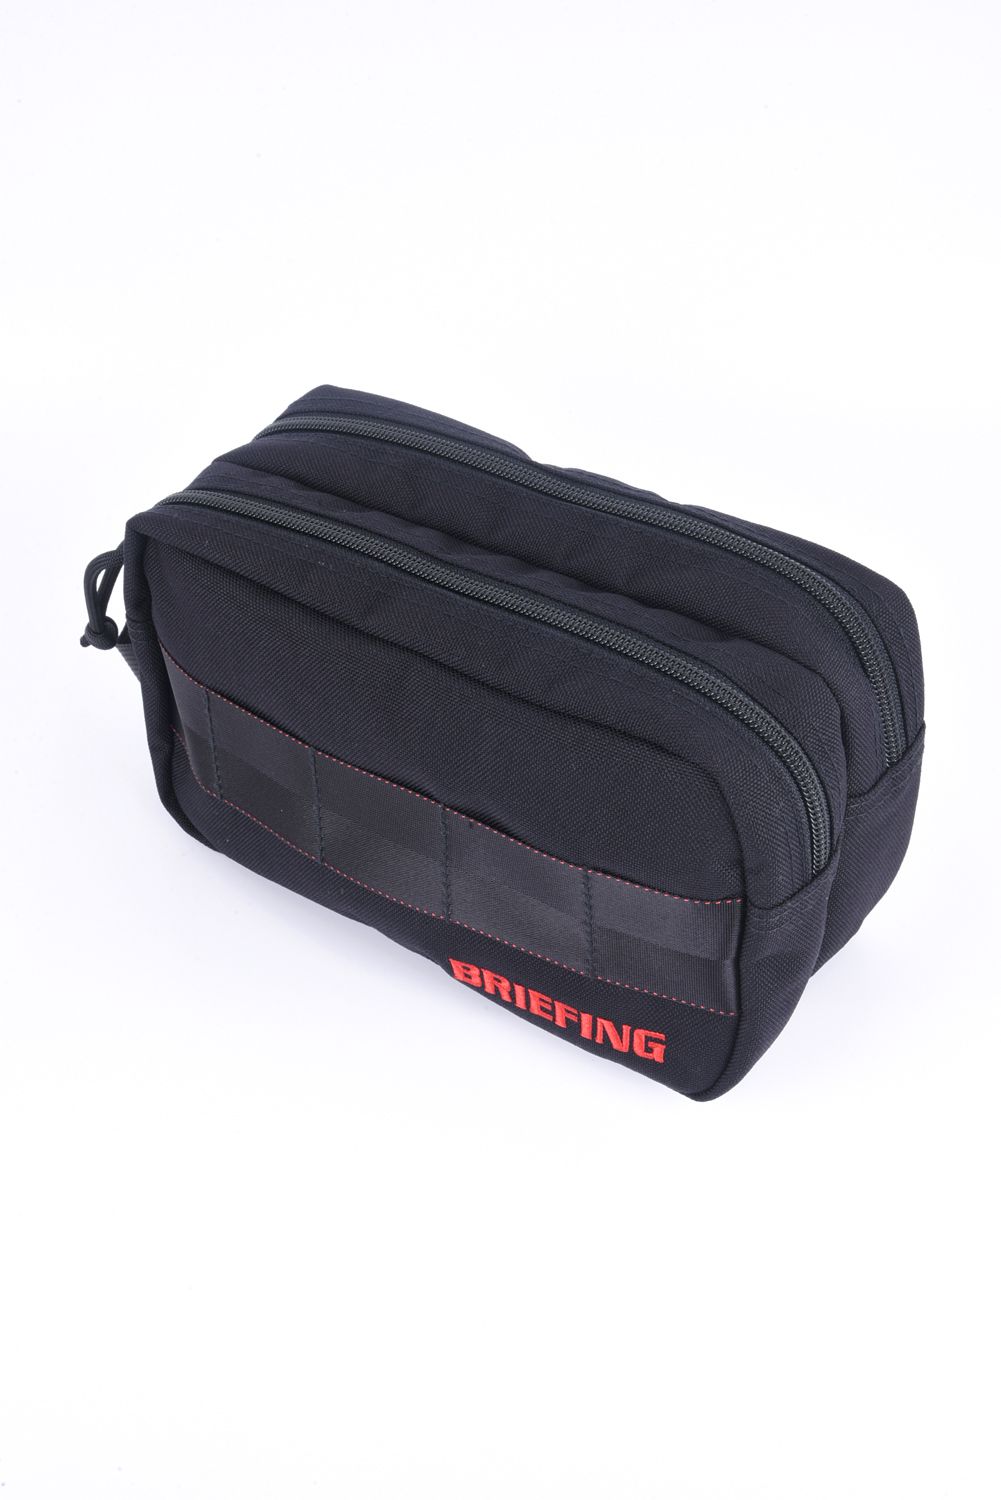 BRIEFING - 【1000Dコーデュラナイロン】 DOUBLE ZIP POUCH-3 GOLF ...